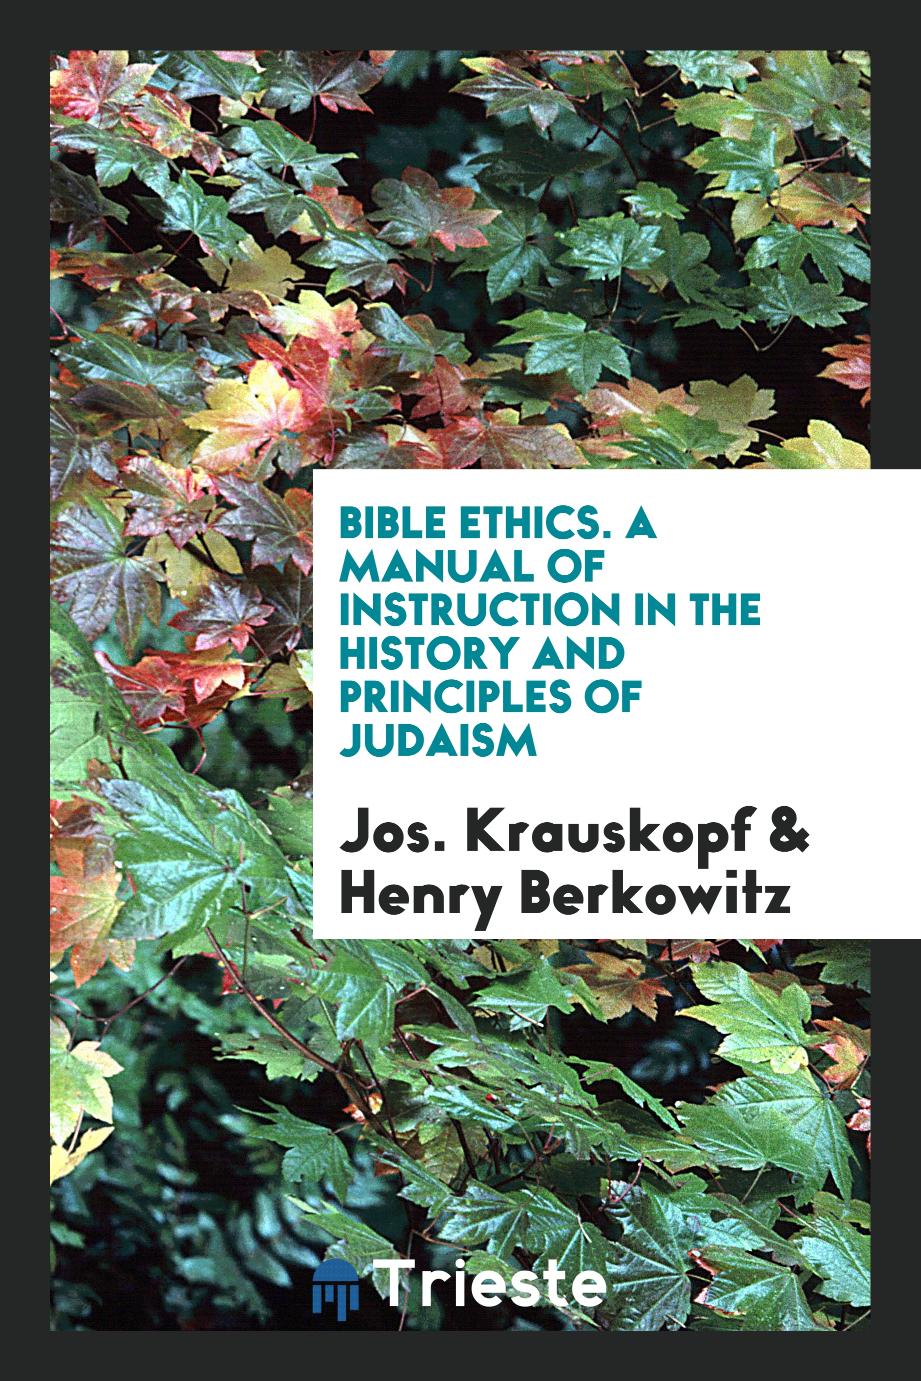 Bible Ethics. A Manual of Instruction in the History and Principles of Judaism